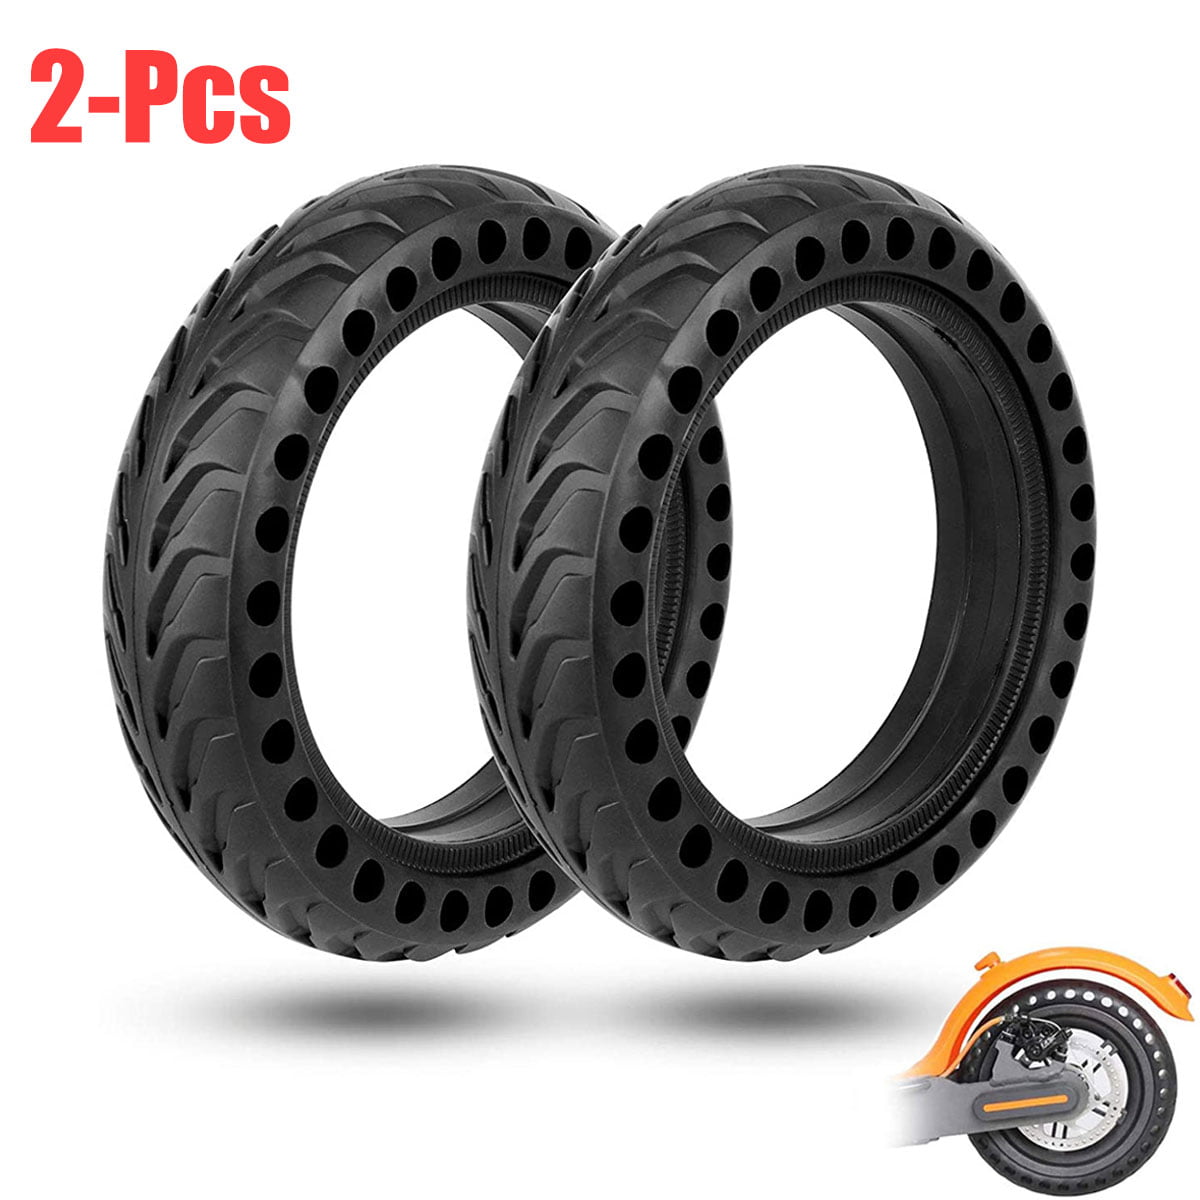 For Xiaomi Mijia M365 electric scooter 8.5 " explosion-proof outer tires solid 